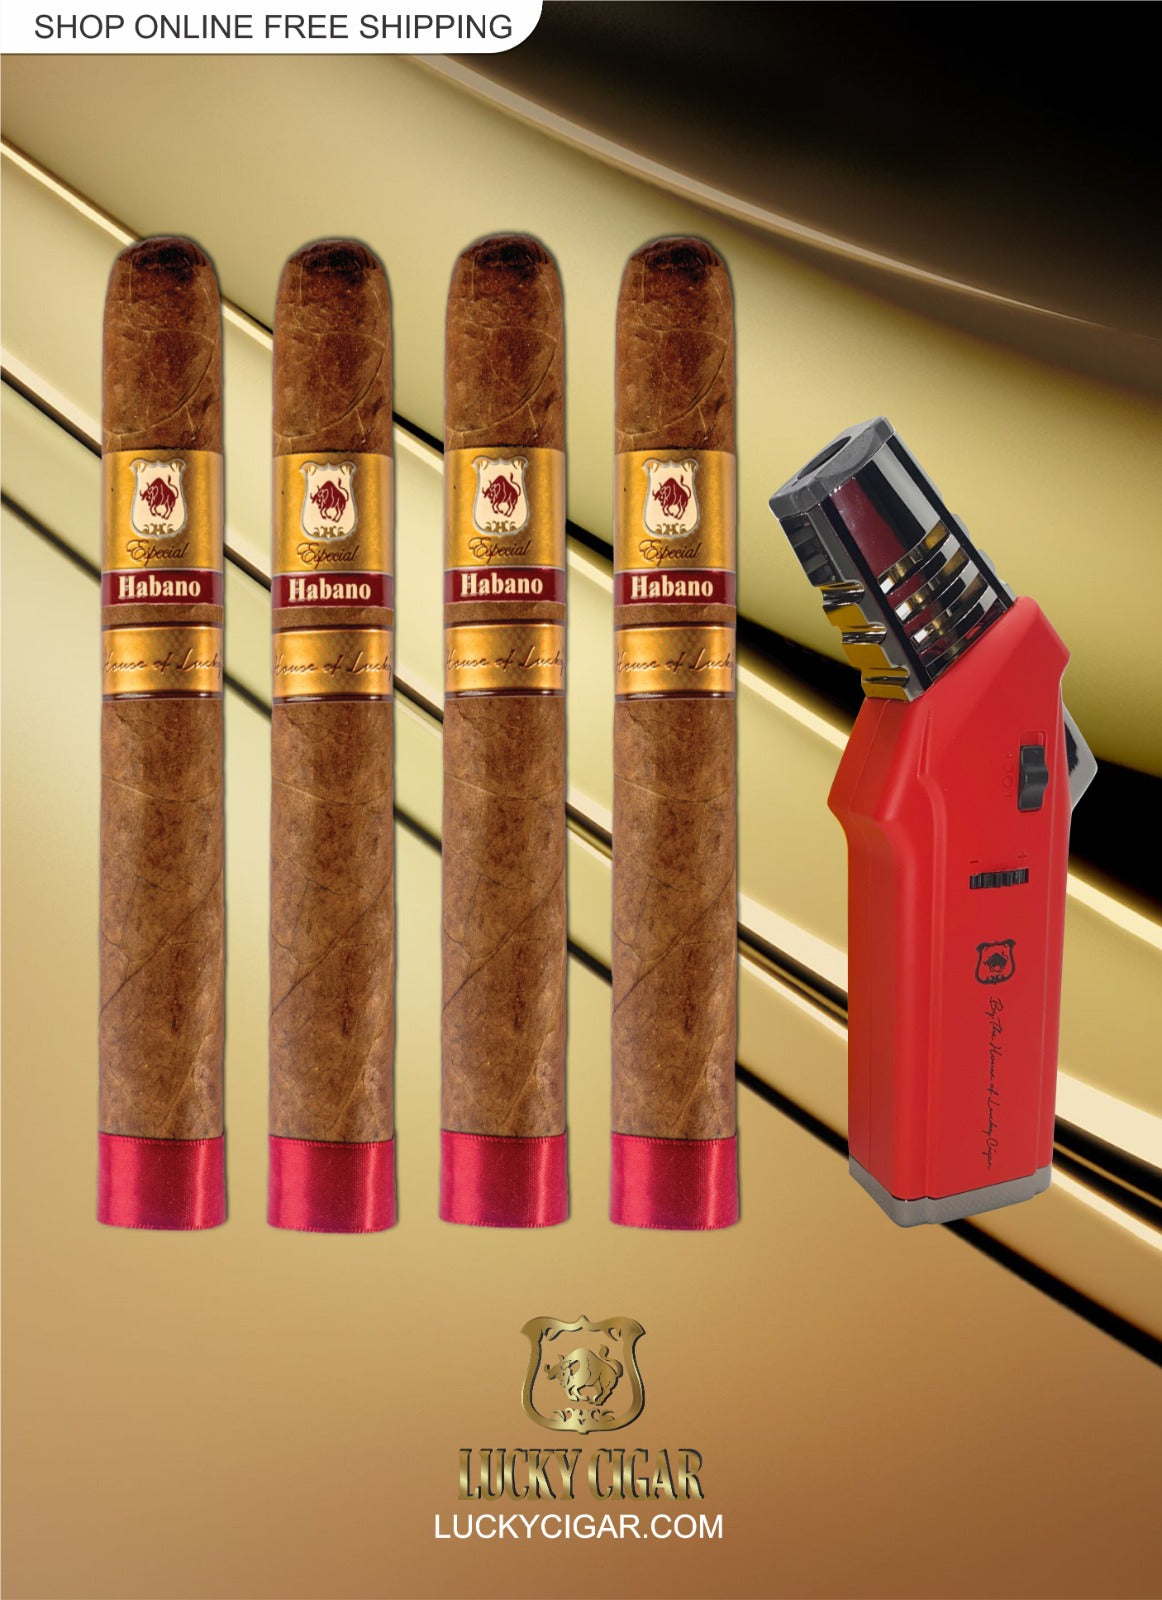 Habano Cigars: Especial Habano by Lucky Cigar: Set of 4 Cigars, 4 Toro with Lighter